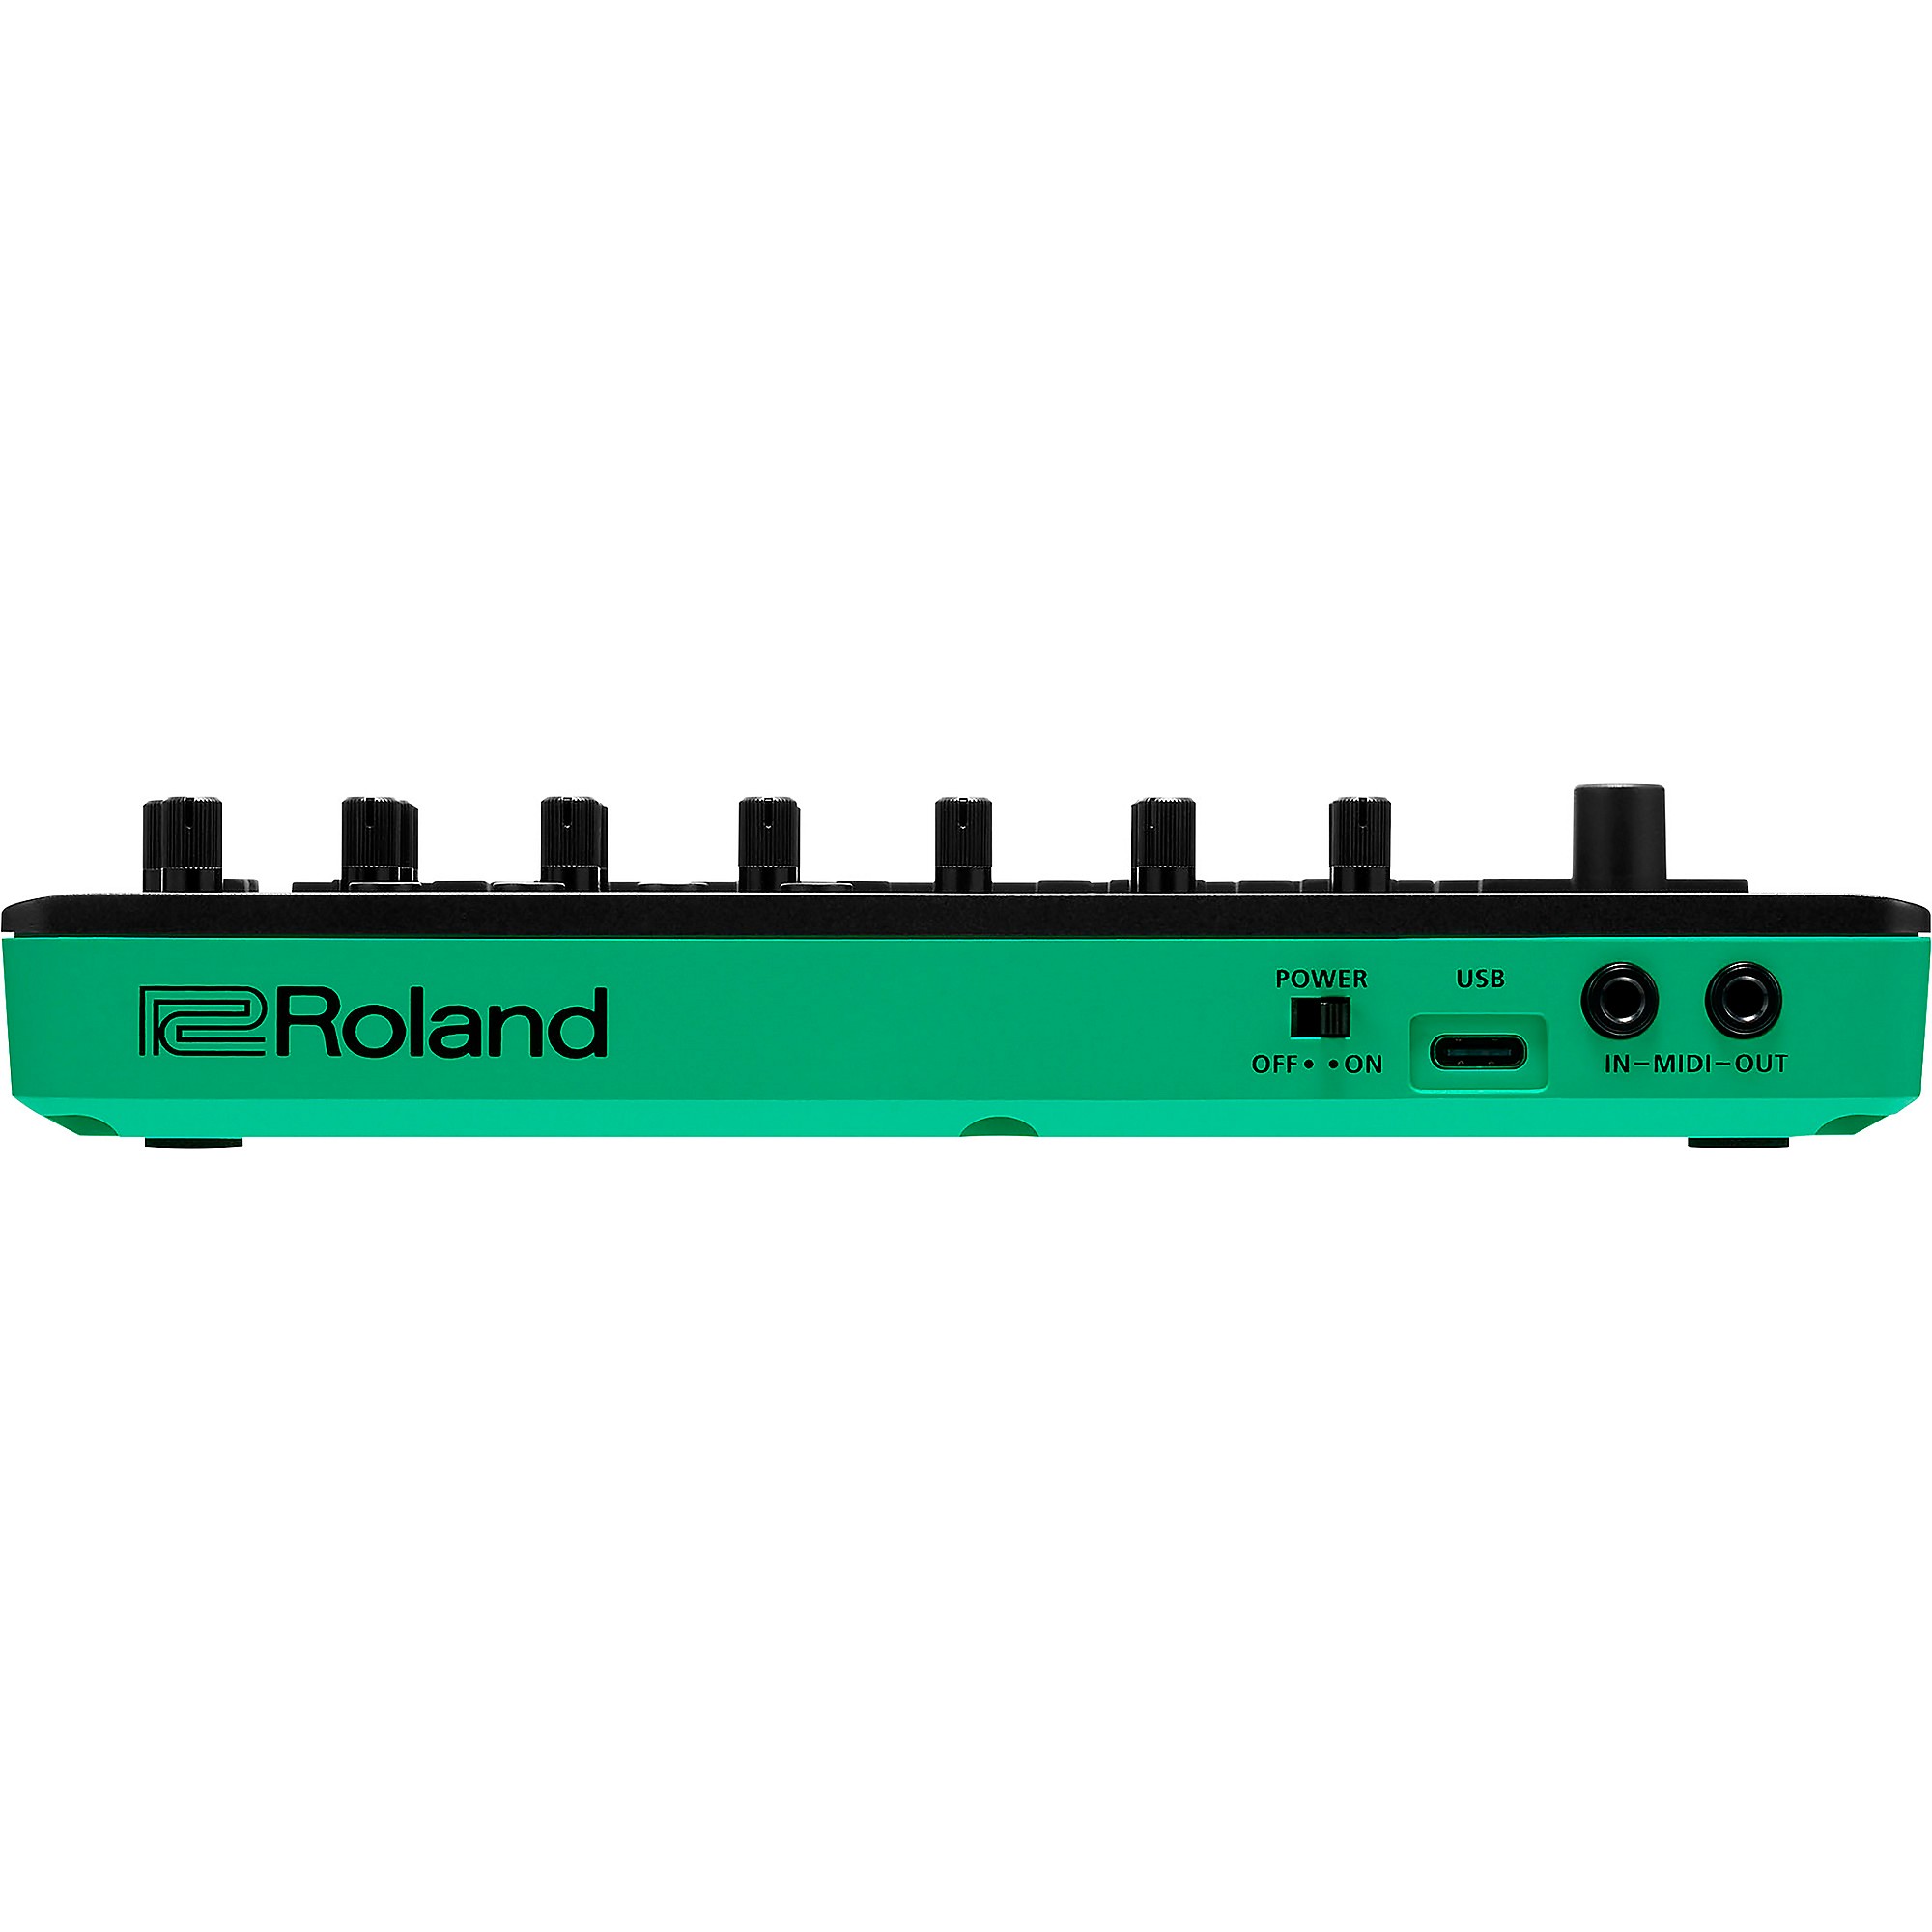 Roland AIRA Compact Series S-1, T-8 and J-6 | Guitar Center